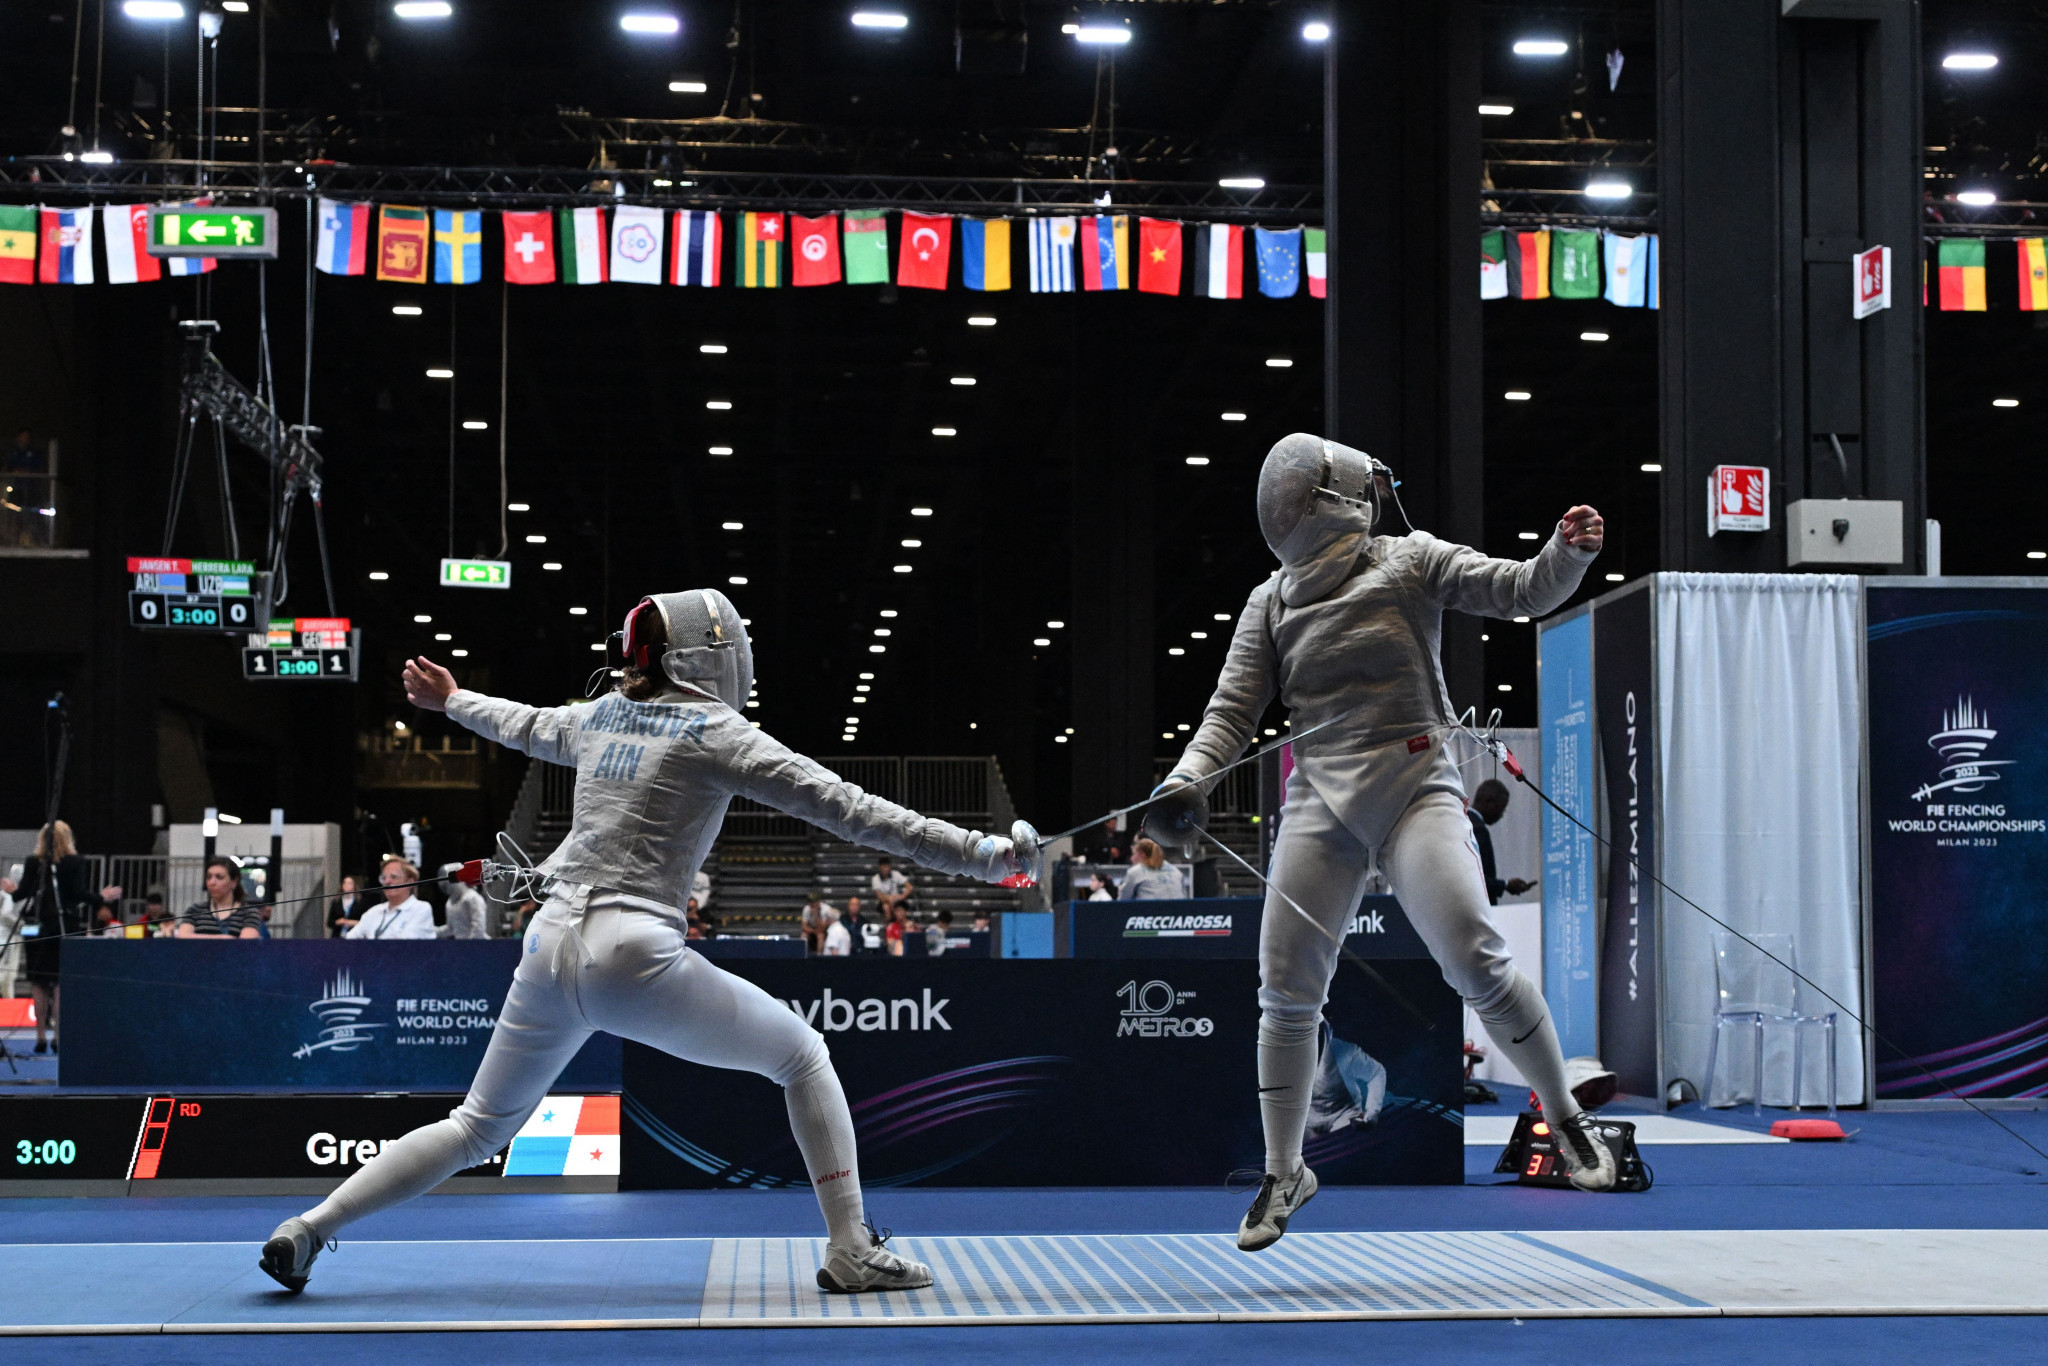 Smirnova books second tie between Russian and Ukrainian athletes at FIE Fencing World Championships